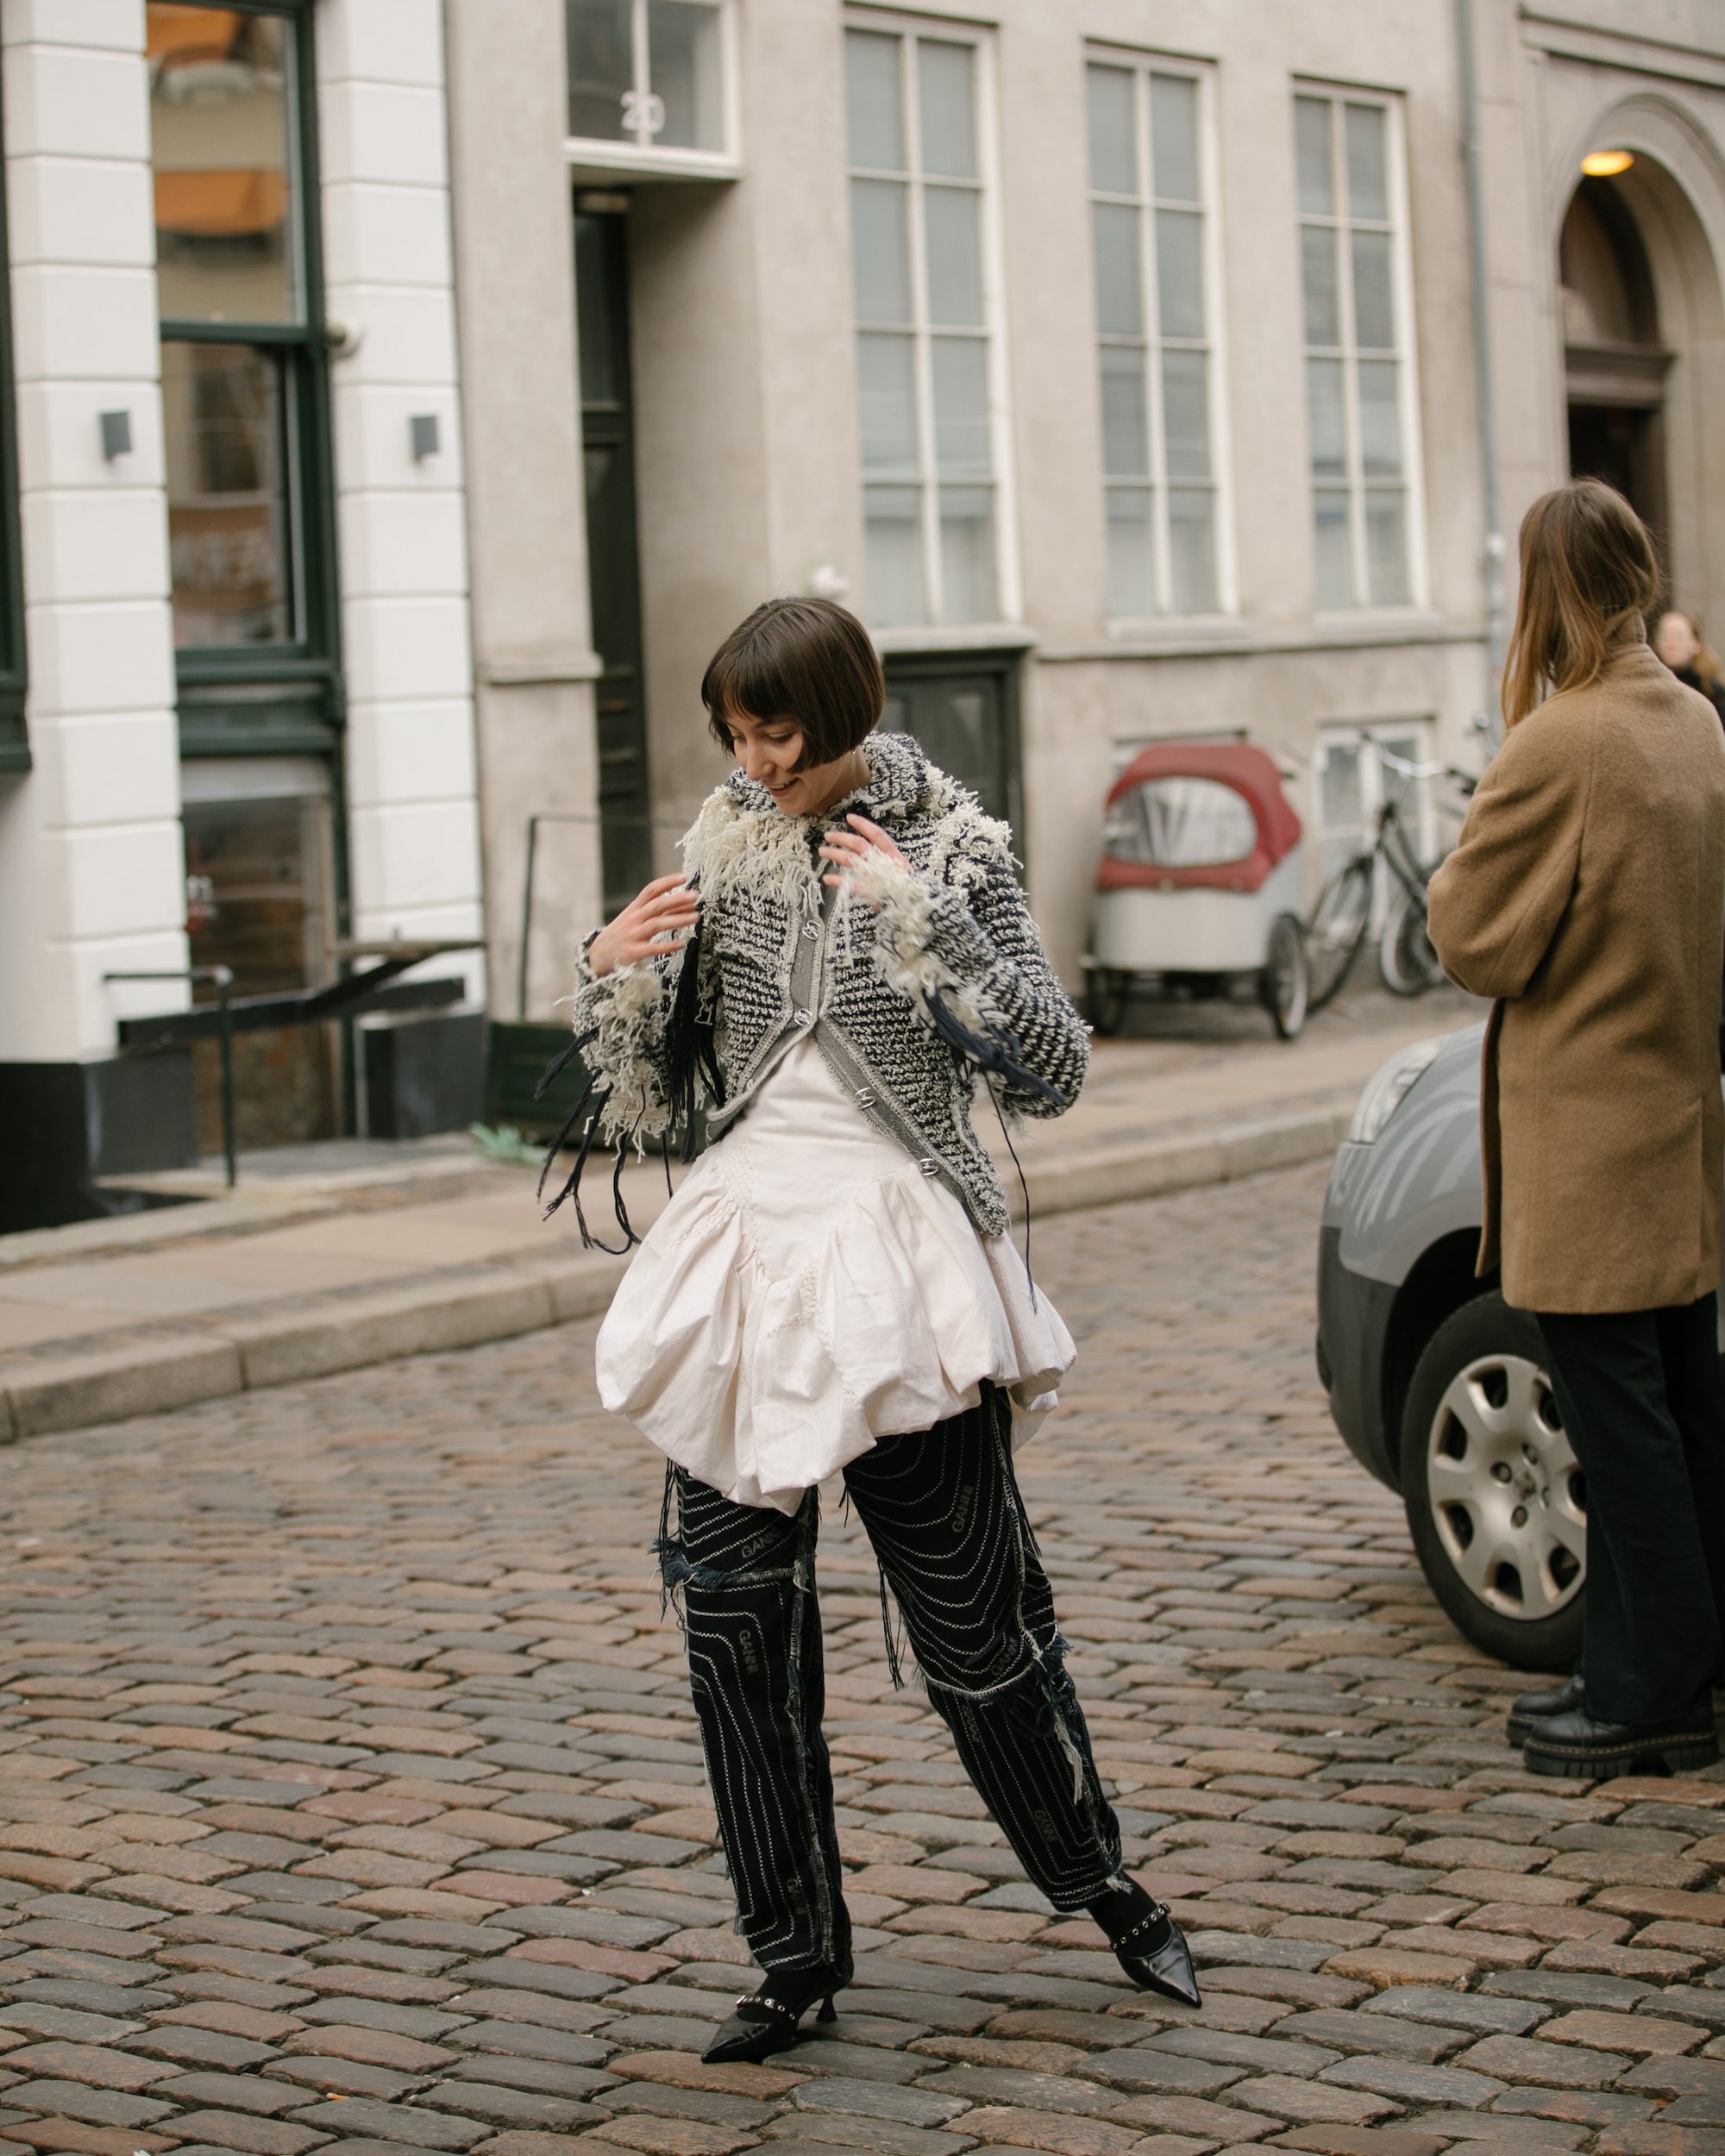 The Street Style At Copenhagen Fashion Week Is Full Of Winter Outfit Ideas